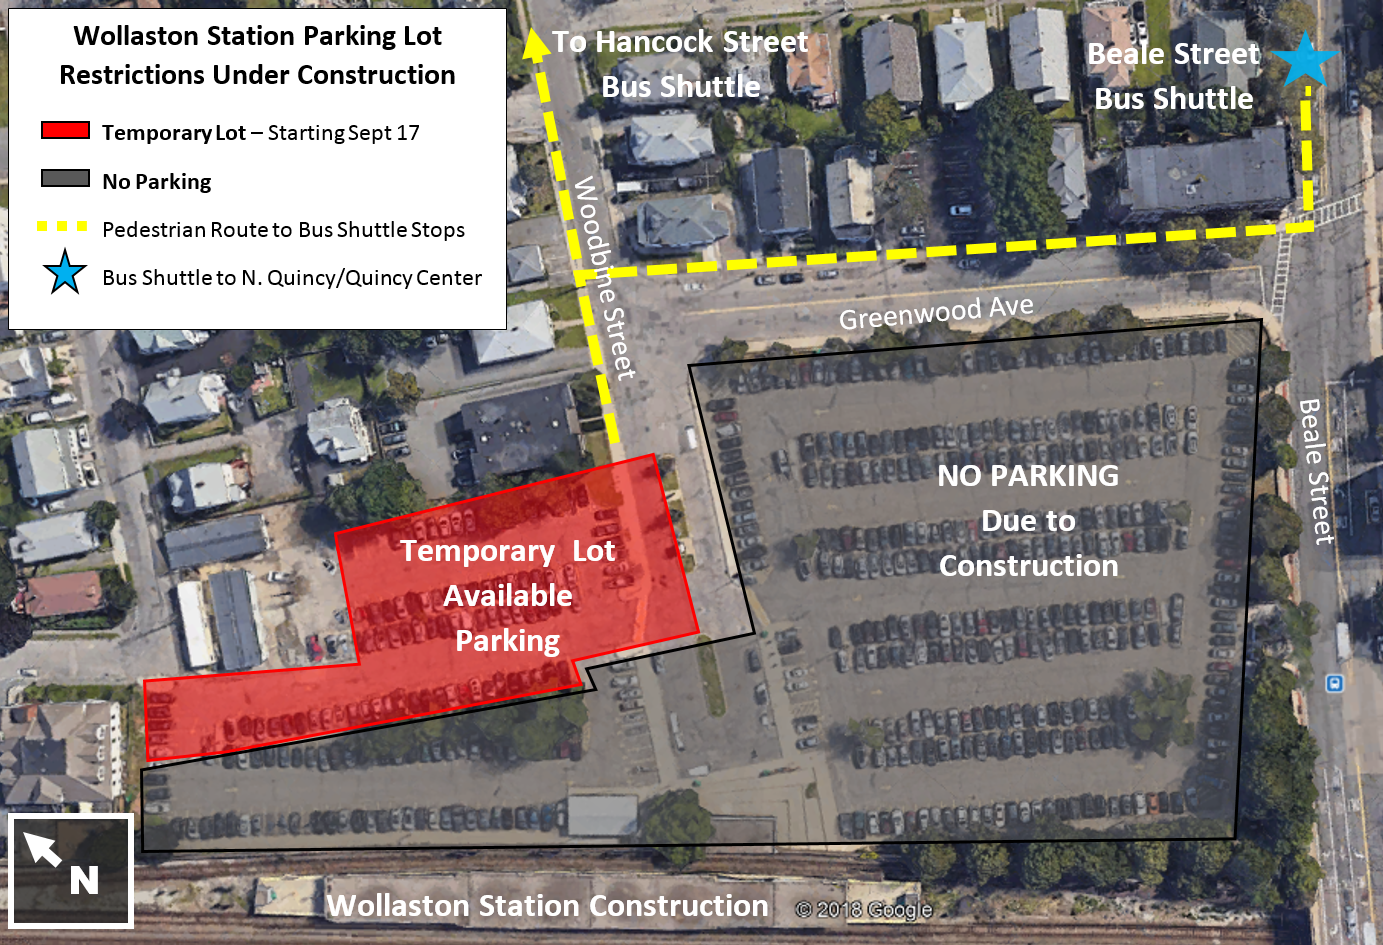 Wollastion station parking lot map. Parking closed due to construction; temporary lot to the left.